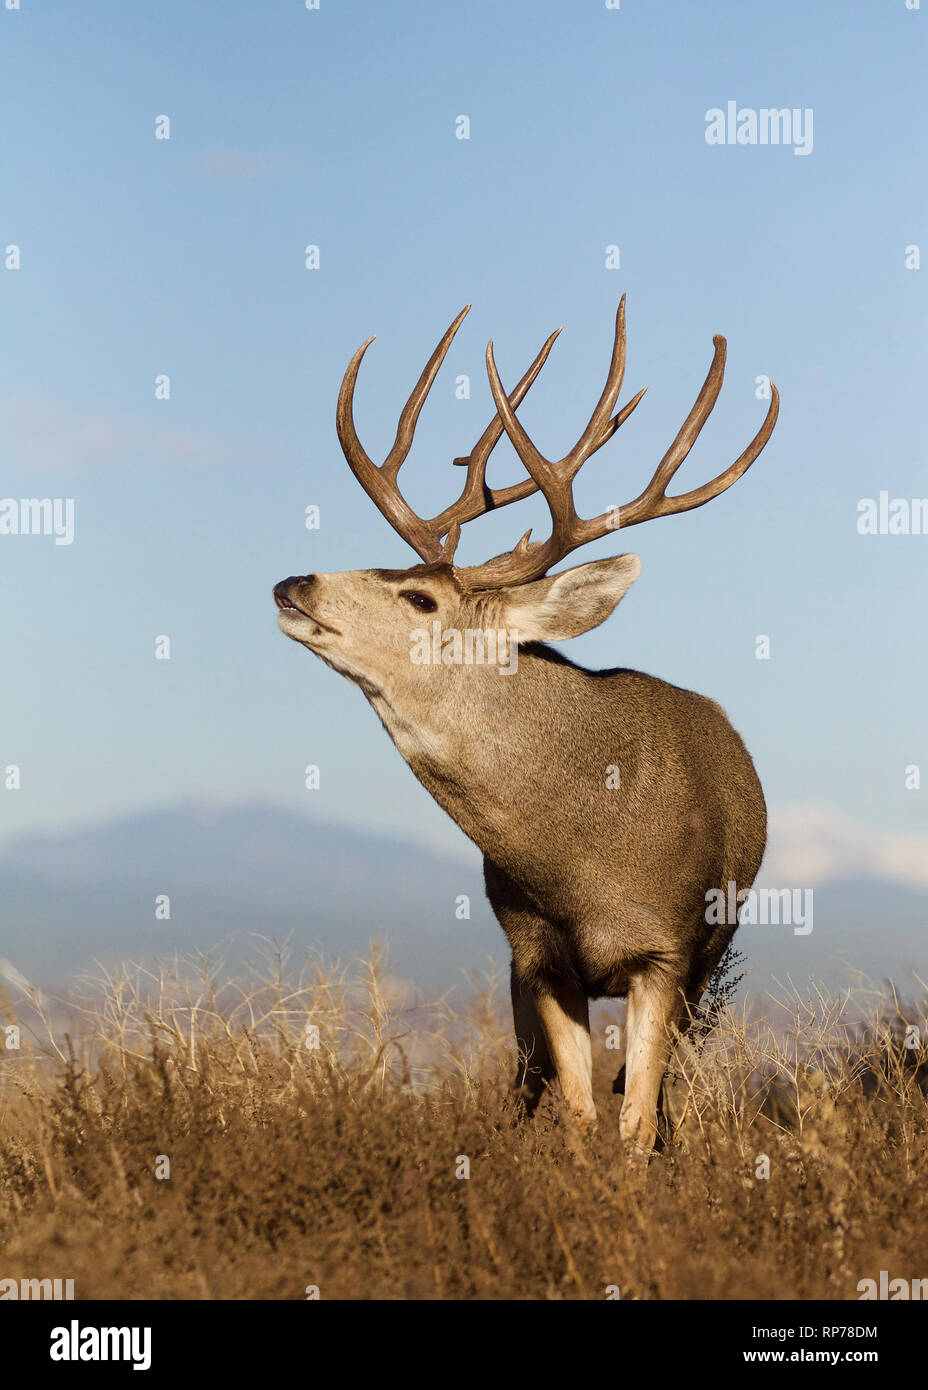 Trophy-class Mule Deer buck 'lip curling' with a clear blue sky and the Rocky Mountains off in the distance Stock Photo